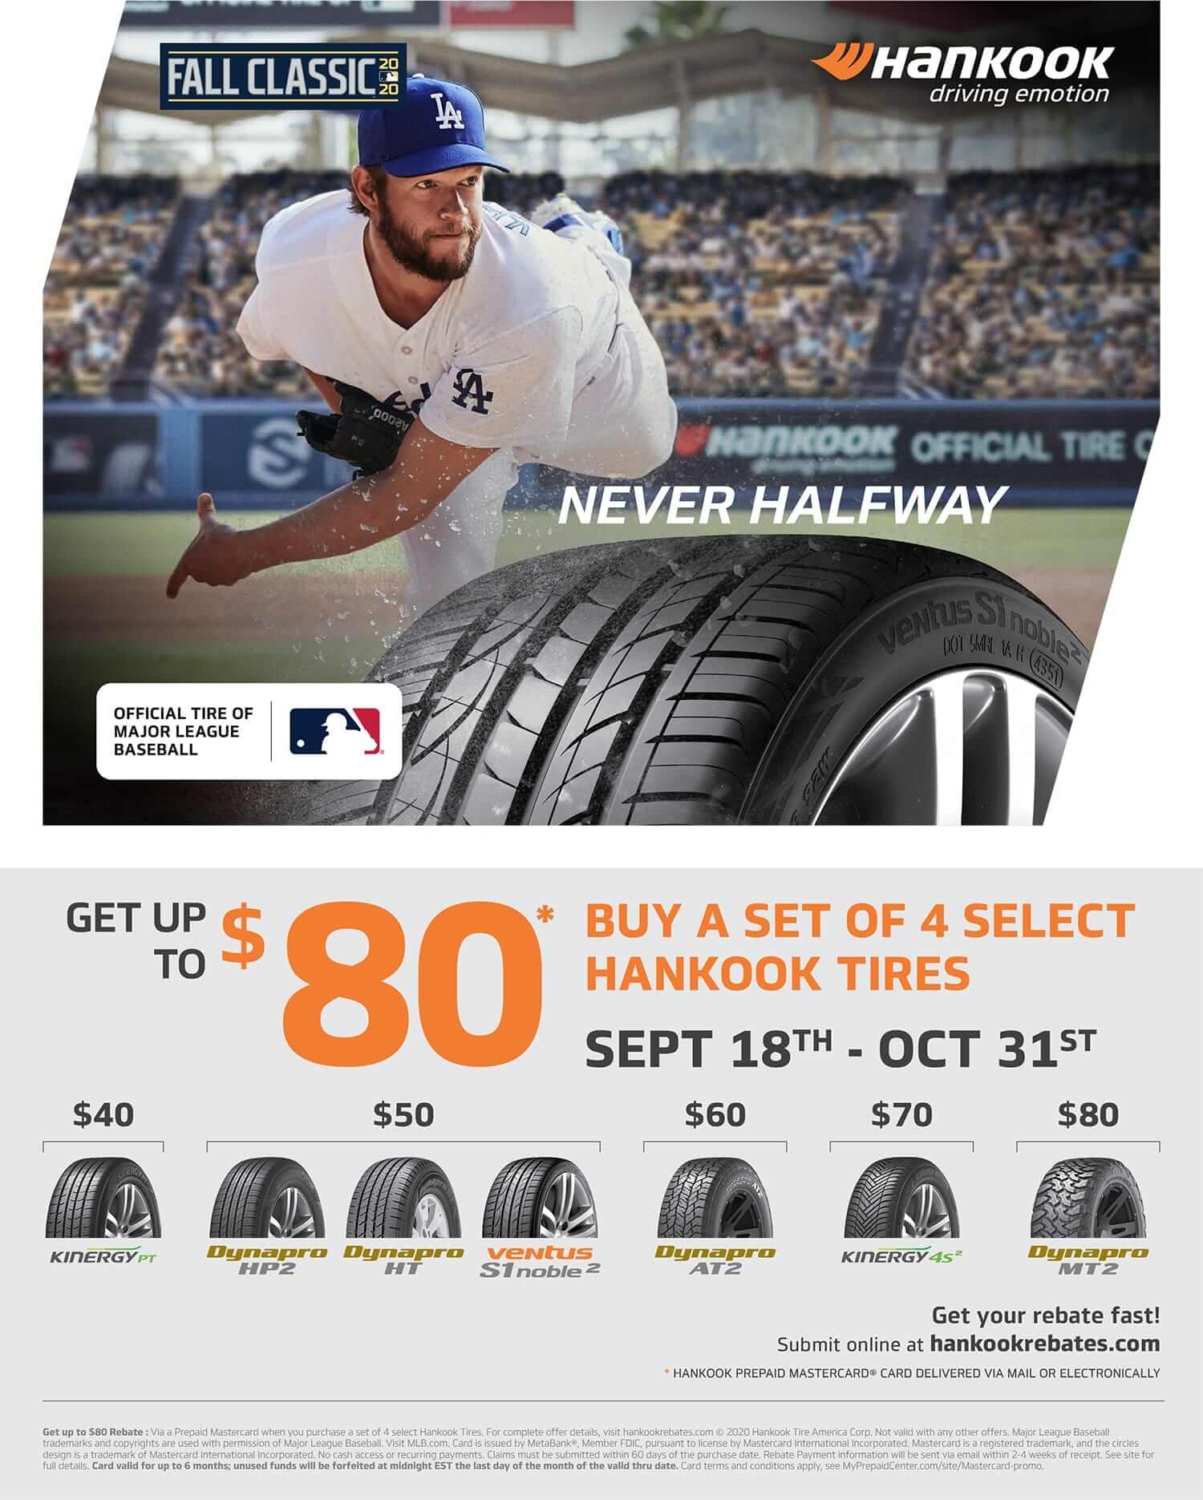 hankook-tire-promotion-save-up-to-80-after-mail-in-rebate-kubly-s-automotive